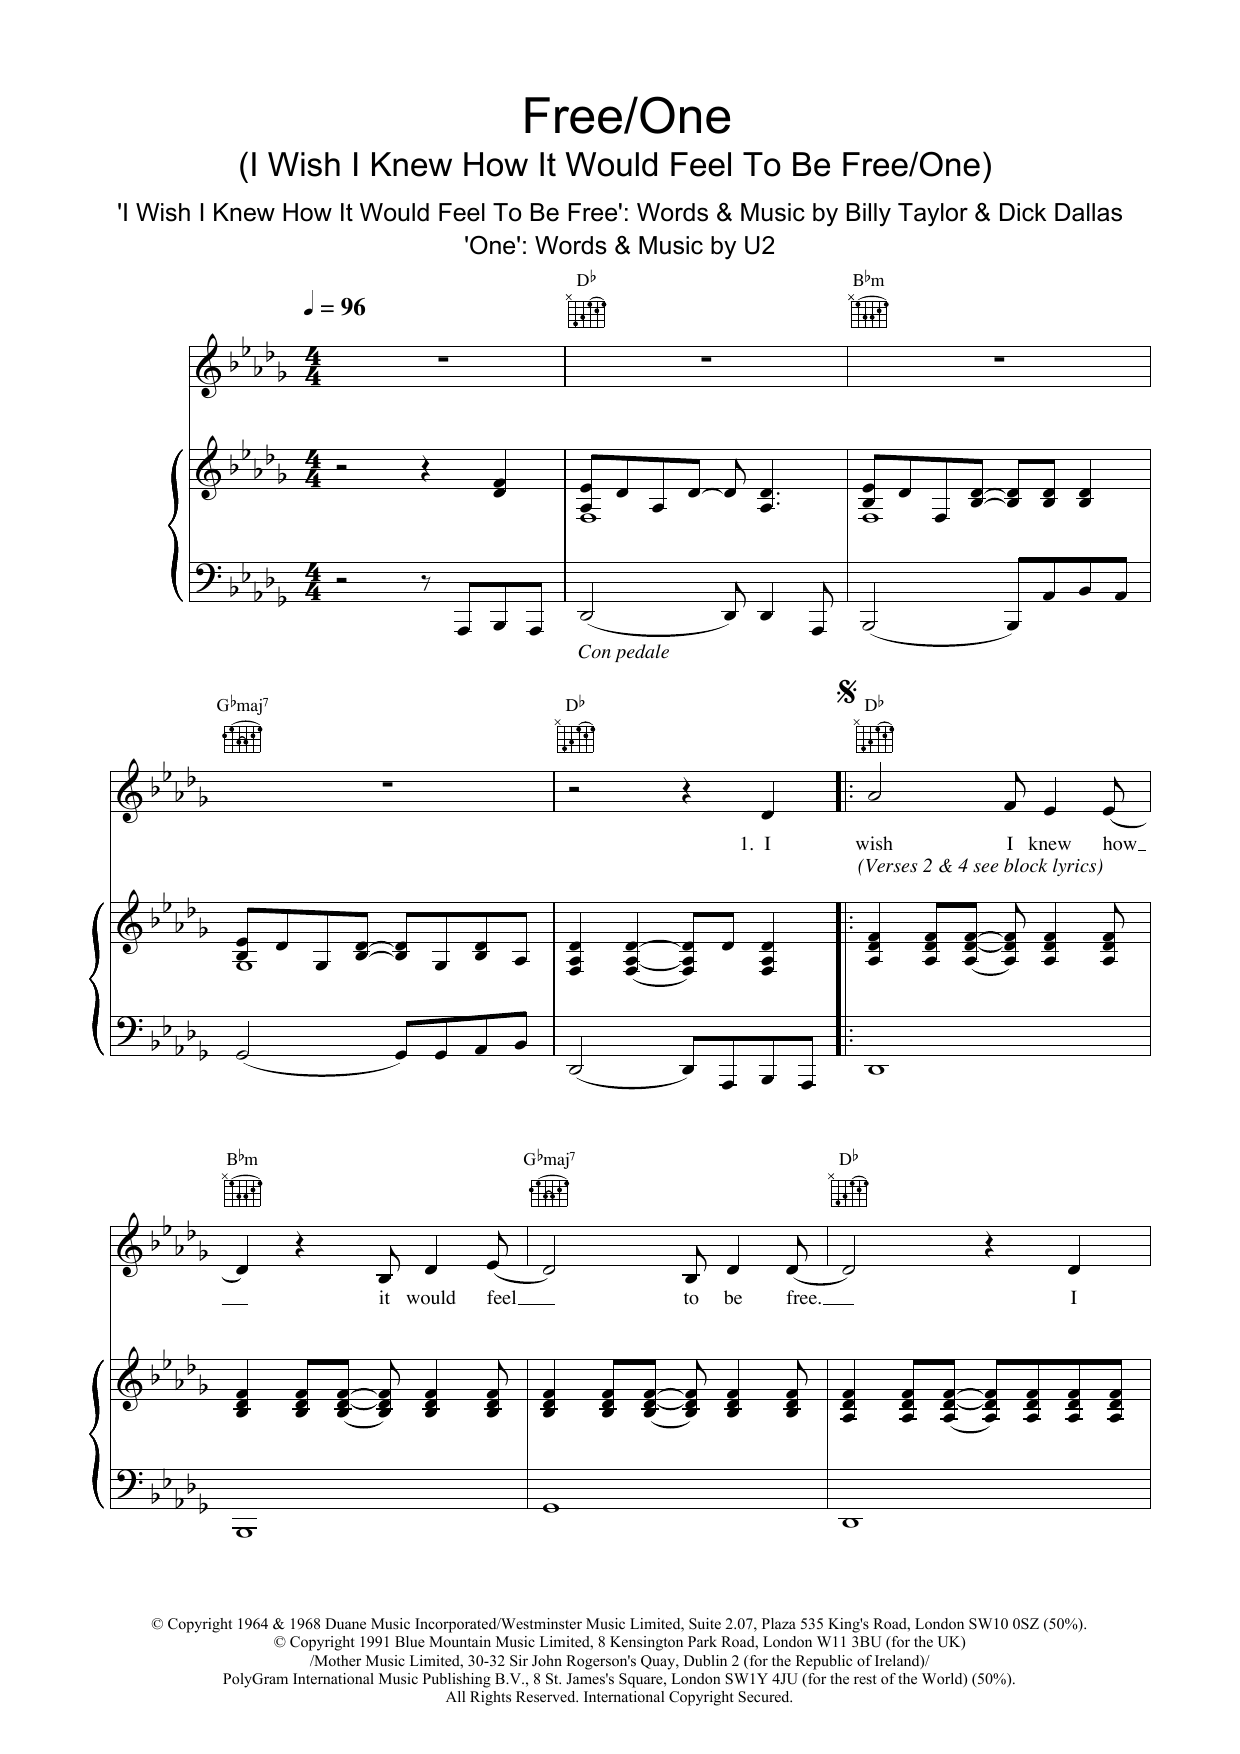 The Lighthouse Family Free/One (I Wish I Knew How It Would Feel To Be & One) sheet music notes and chords. Download Printable PDF.